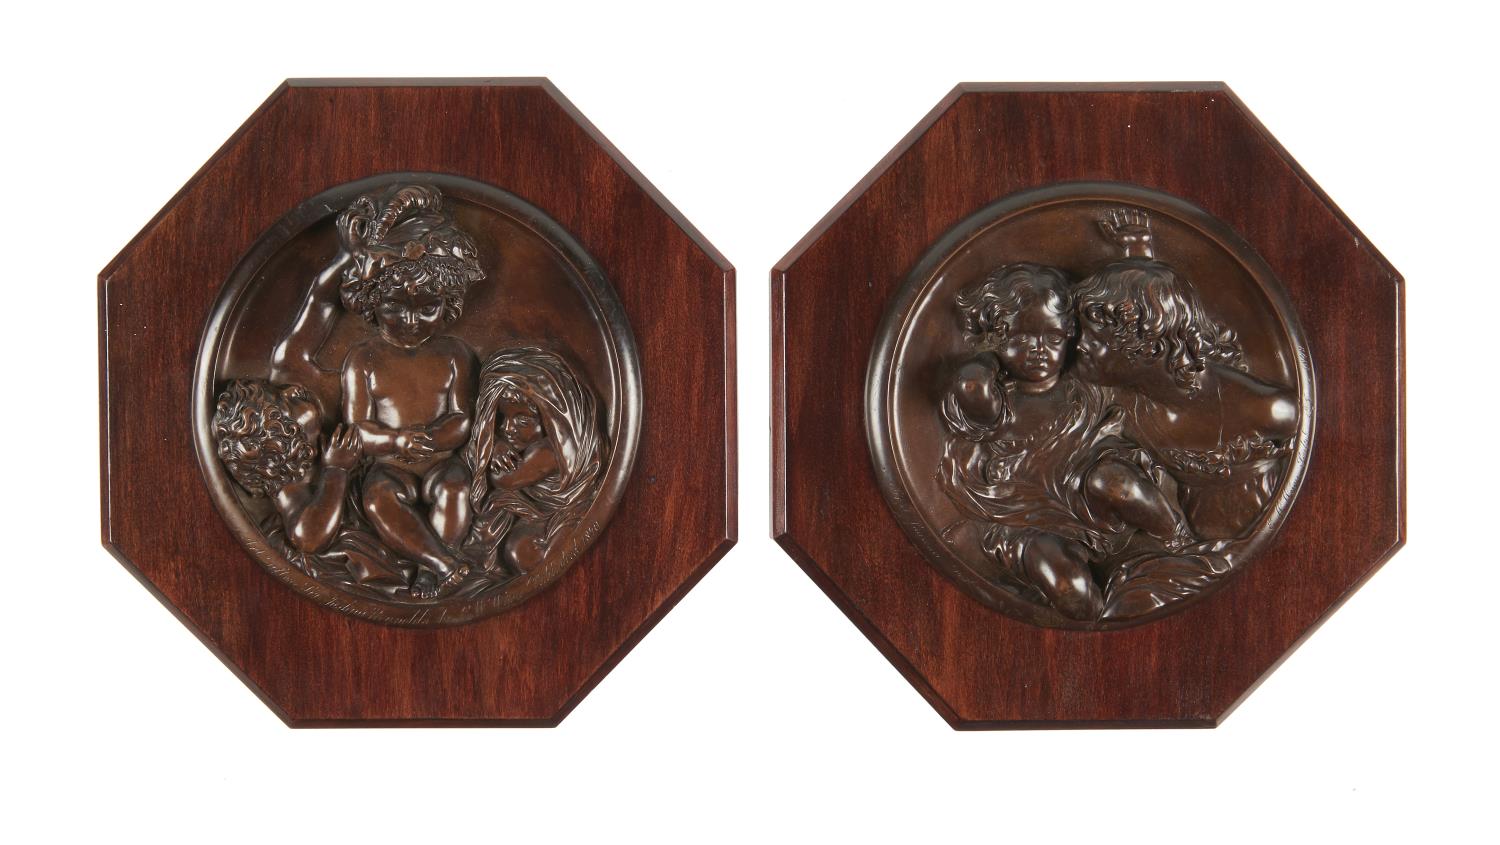 A PAIR OF BRONZED ELECTROTYPE RELIEFS BY E W WYON, PUBLISHED 1 JUNE 1848 AND 1849 AFTER   SIR THOMAS